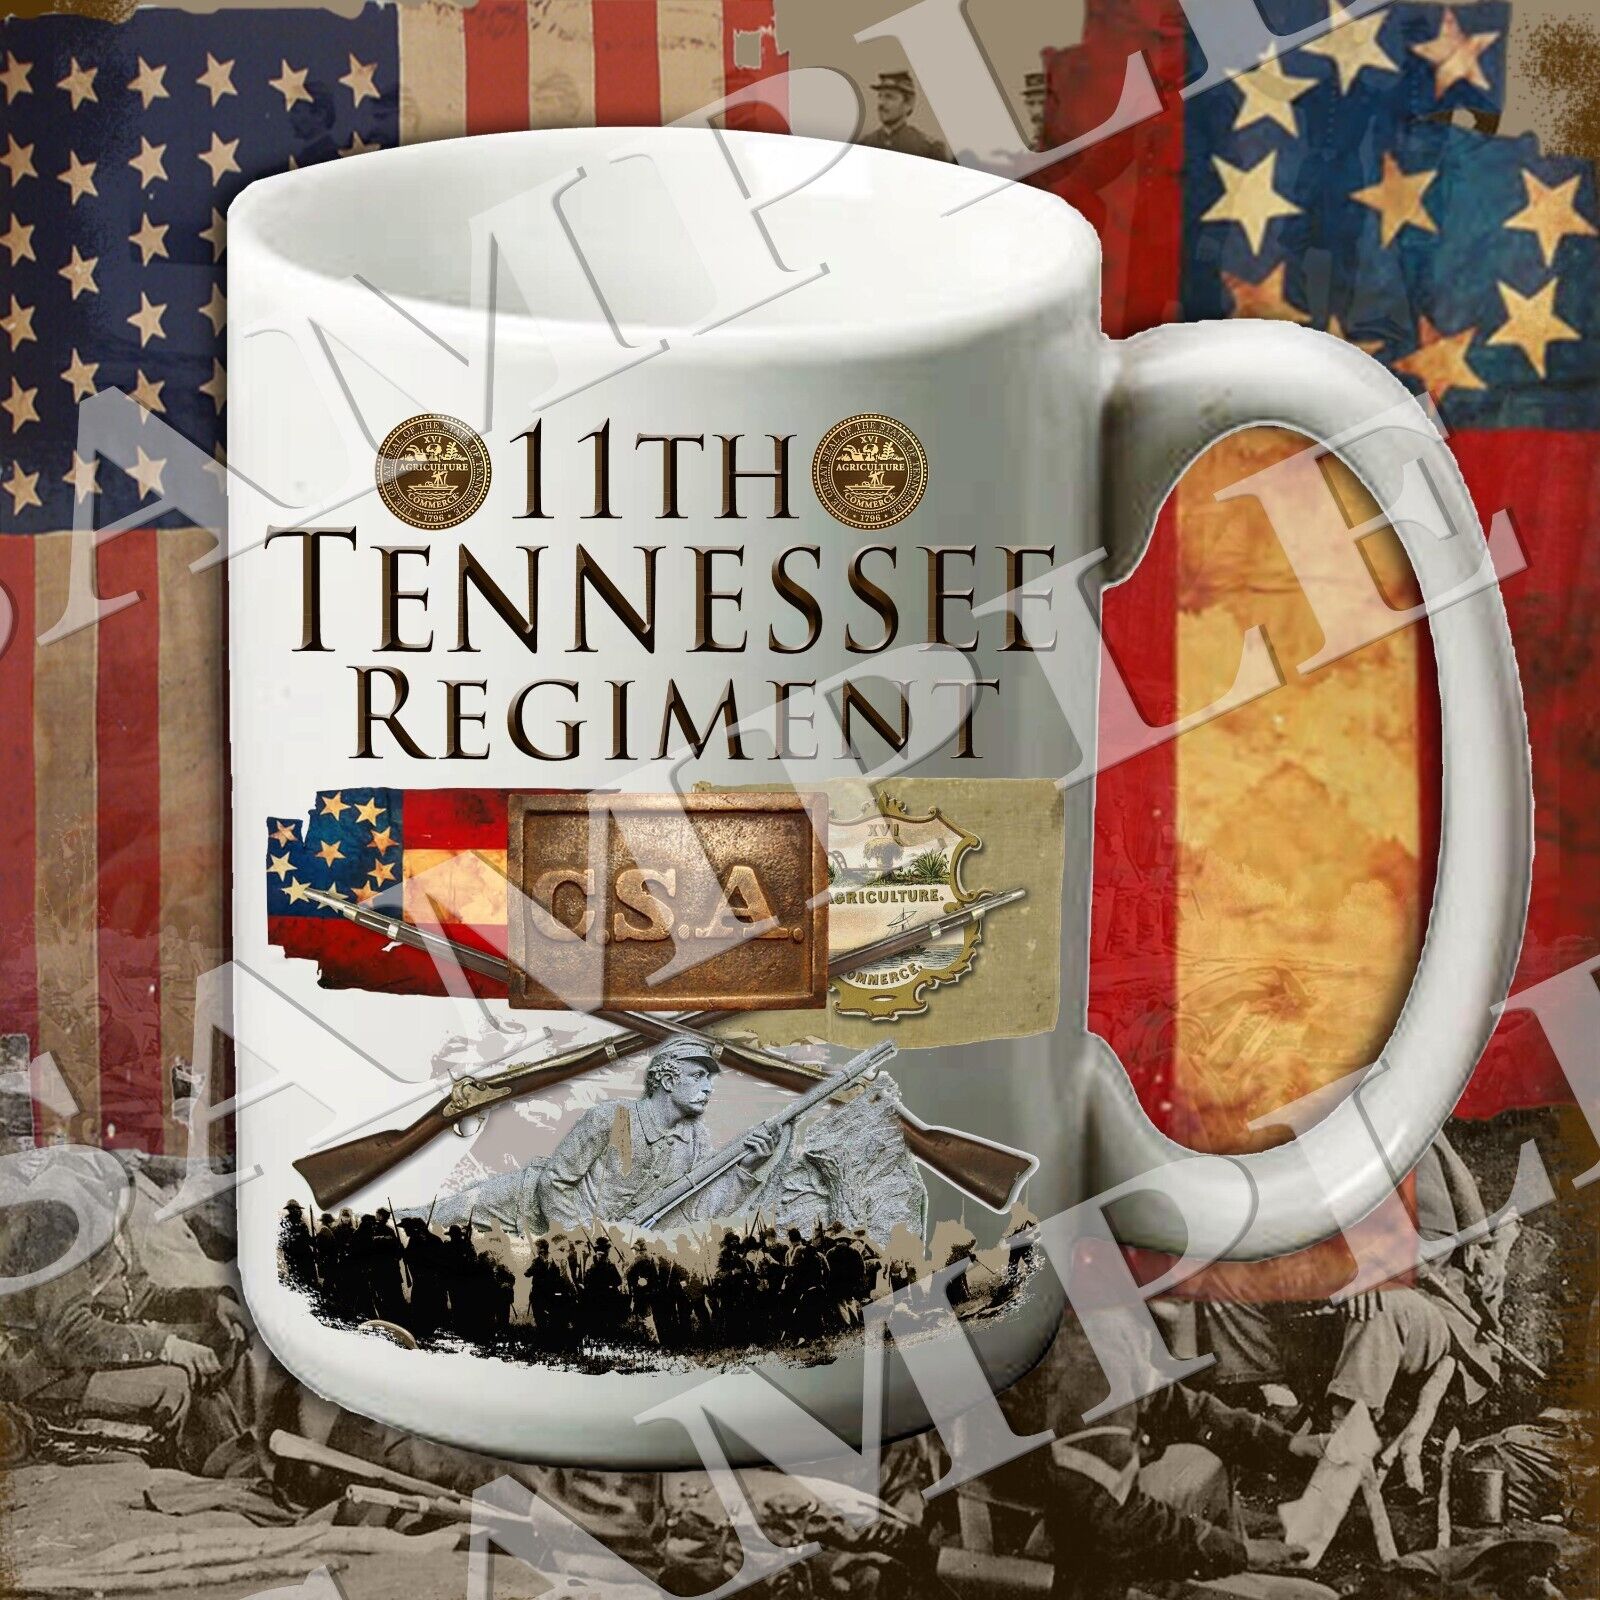 11th Tennessee Regiment 15-ounce American Civil War themed coffee mug/cup